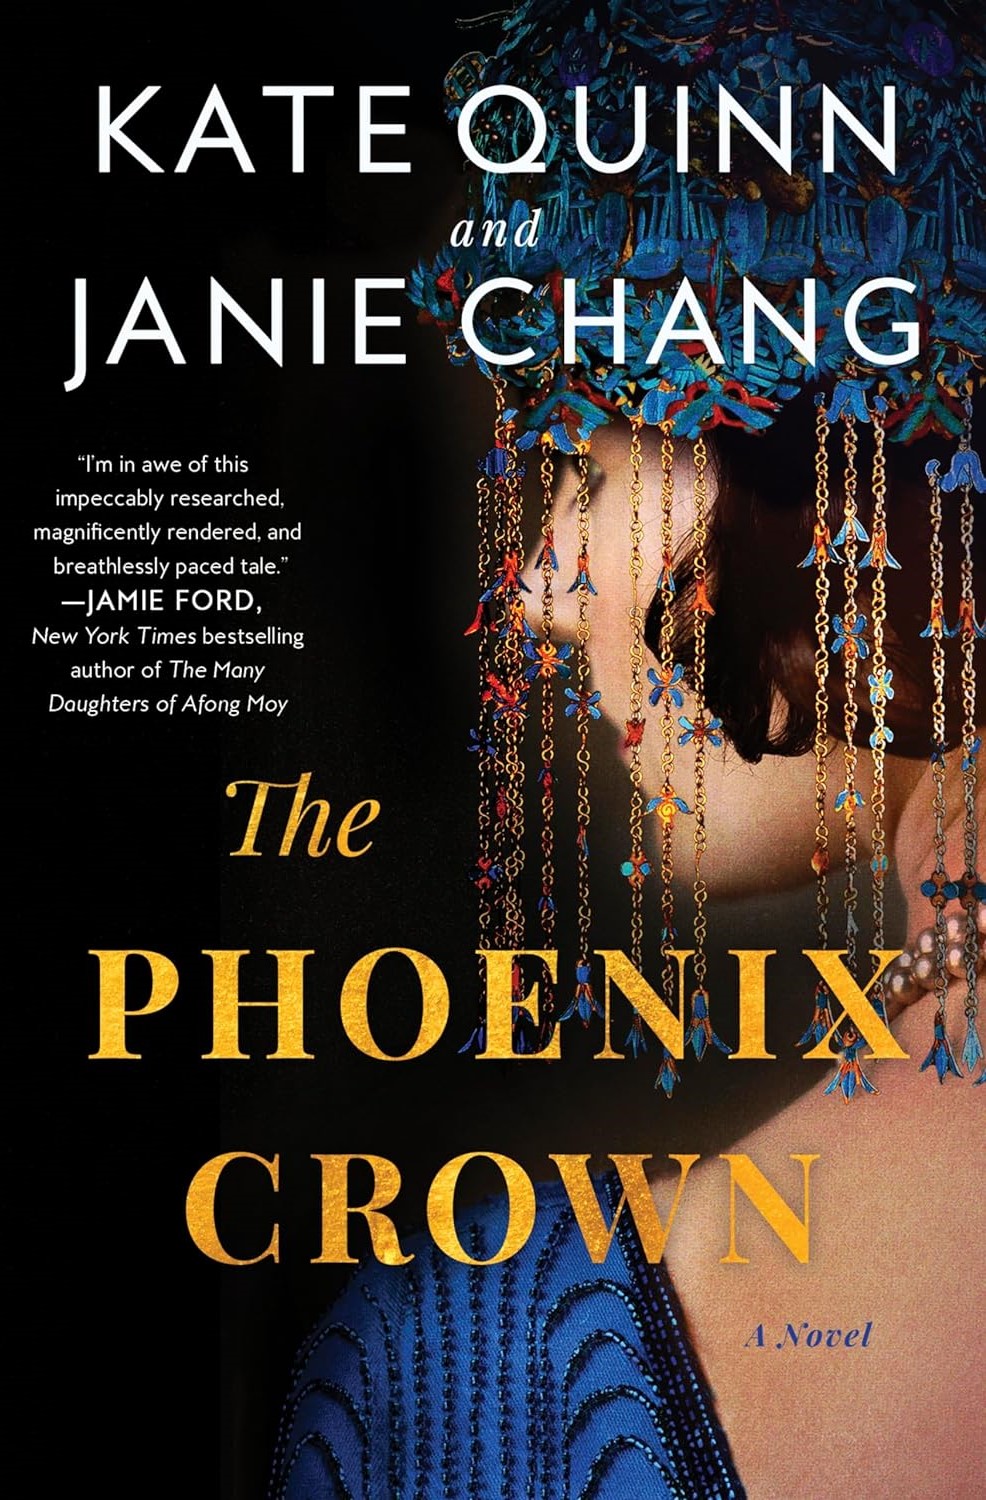 The Phoenix Crown by Kate Quinn and Janie Chang